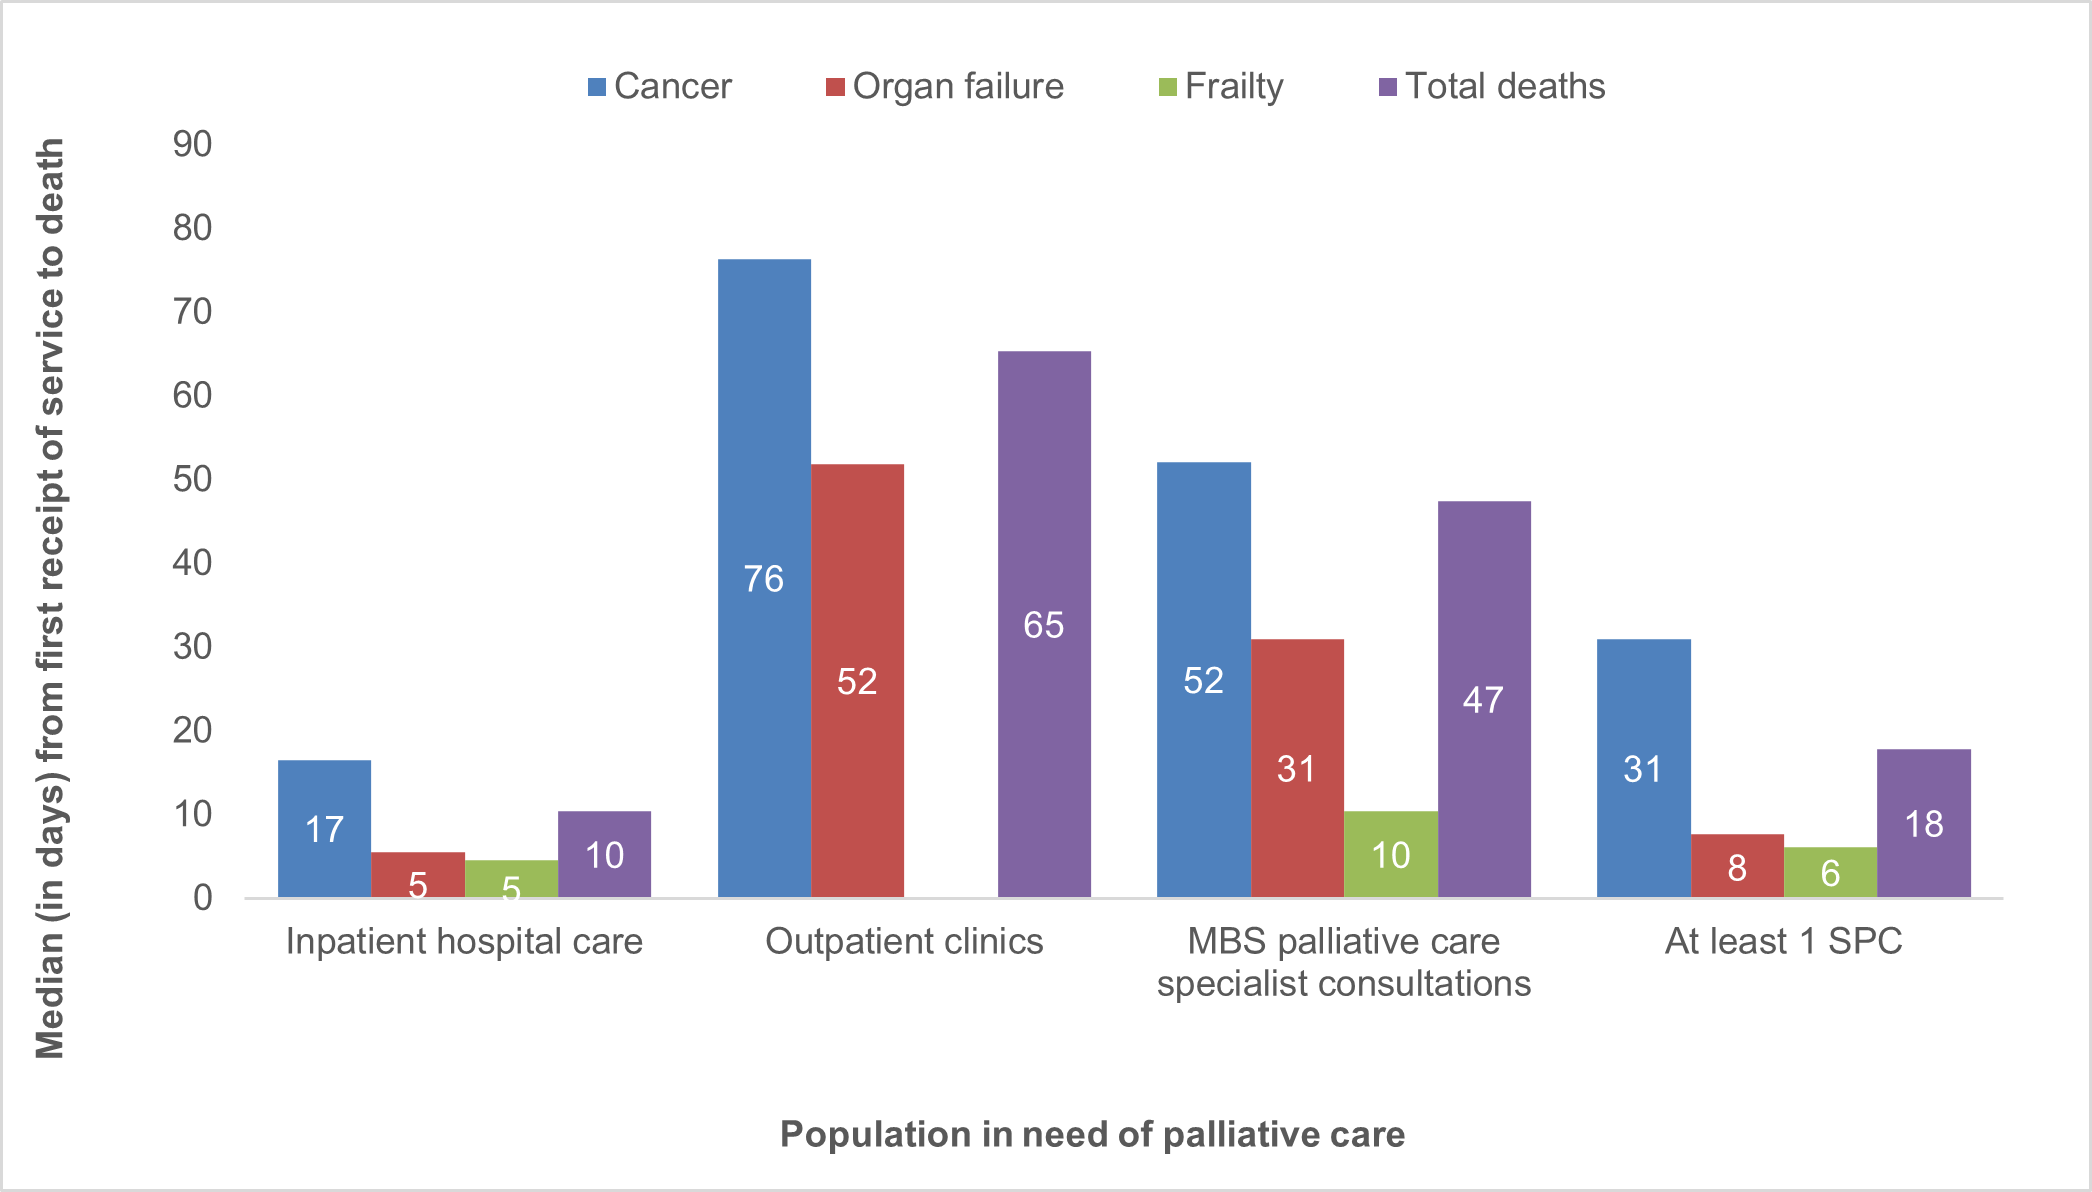 This figure shows the median number of days from first receipt of health service to death, by cause of death, for a population in need of palliative care.